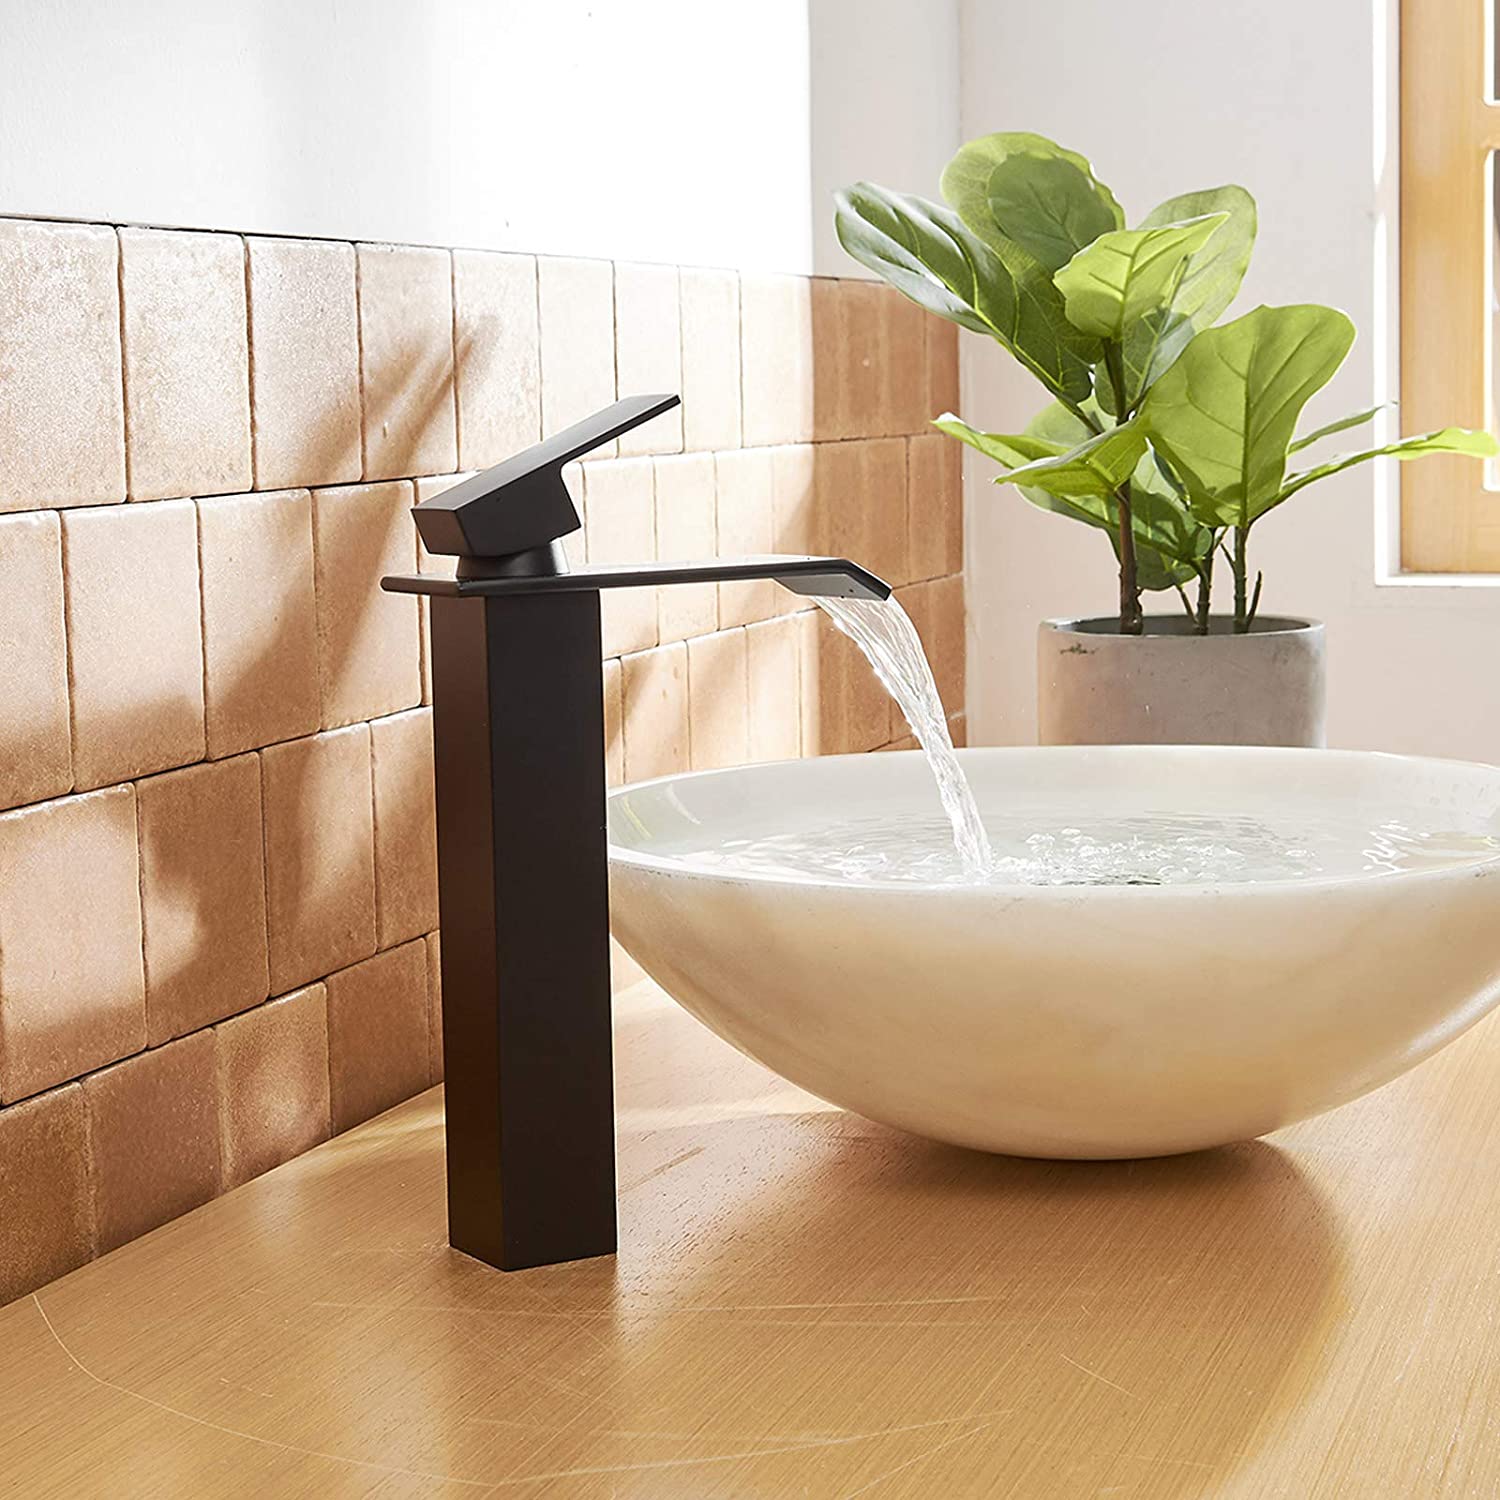 BWE Vessel Sink Faucet with Drain Assembly Without Overflow and Supply Hose Lead-Free Lavatory Waterfall Black Bathroom Faucet Single Handle One Hole Mixer Tap Tall Body Matte - image 3 of 9